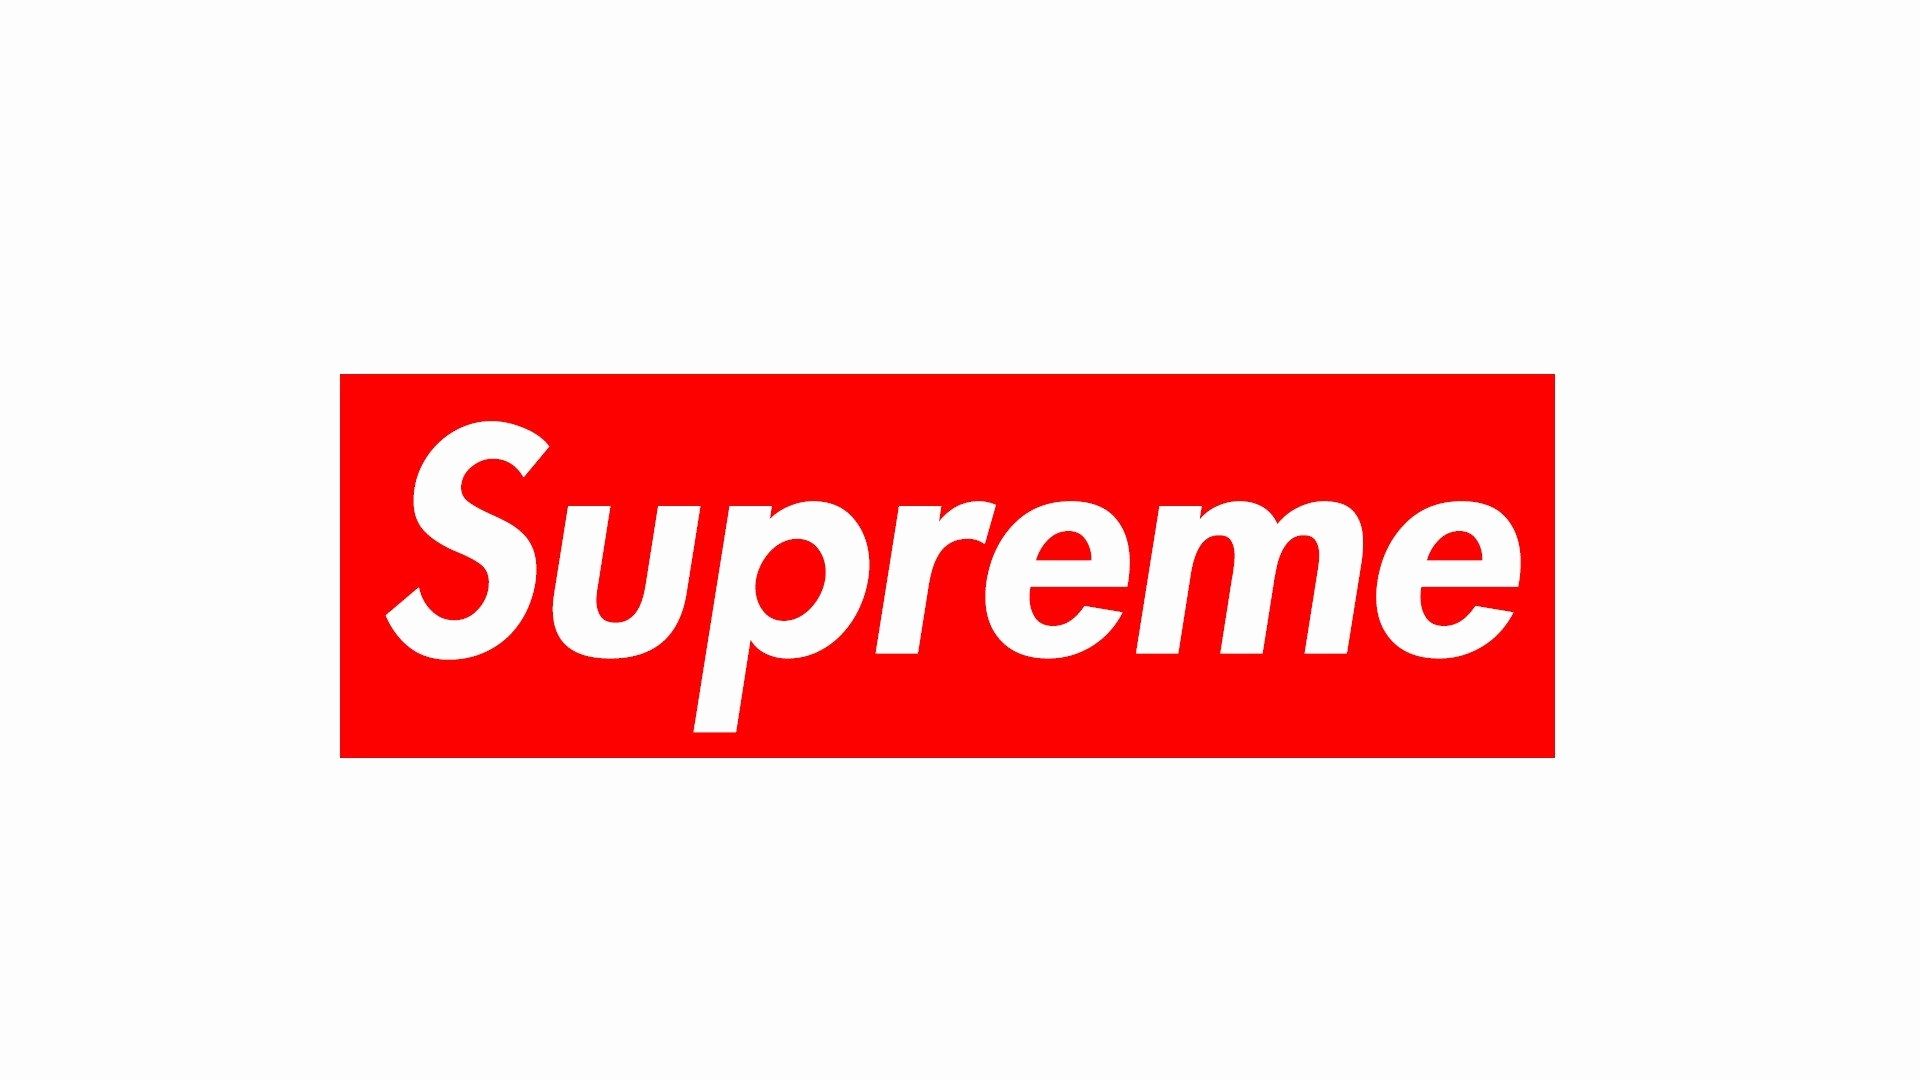 Supreme 1920x1080 Awesome Supreme Brand Fashion Red White 1920 HD Wallpaper Desktop and Mobile & S for You of The Hudson